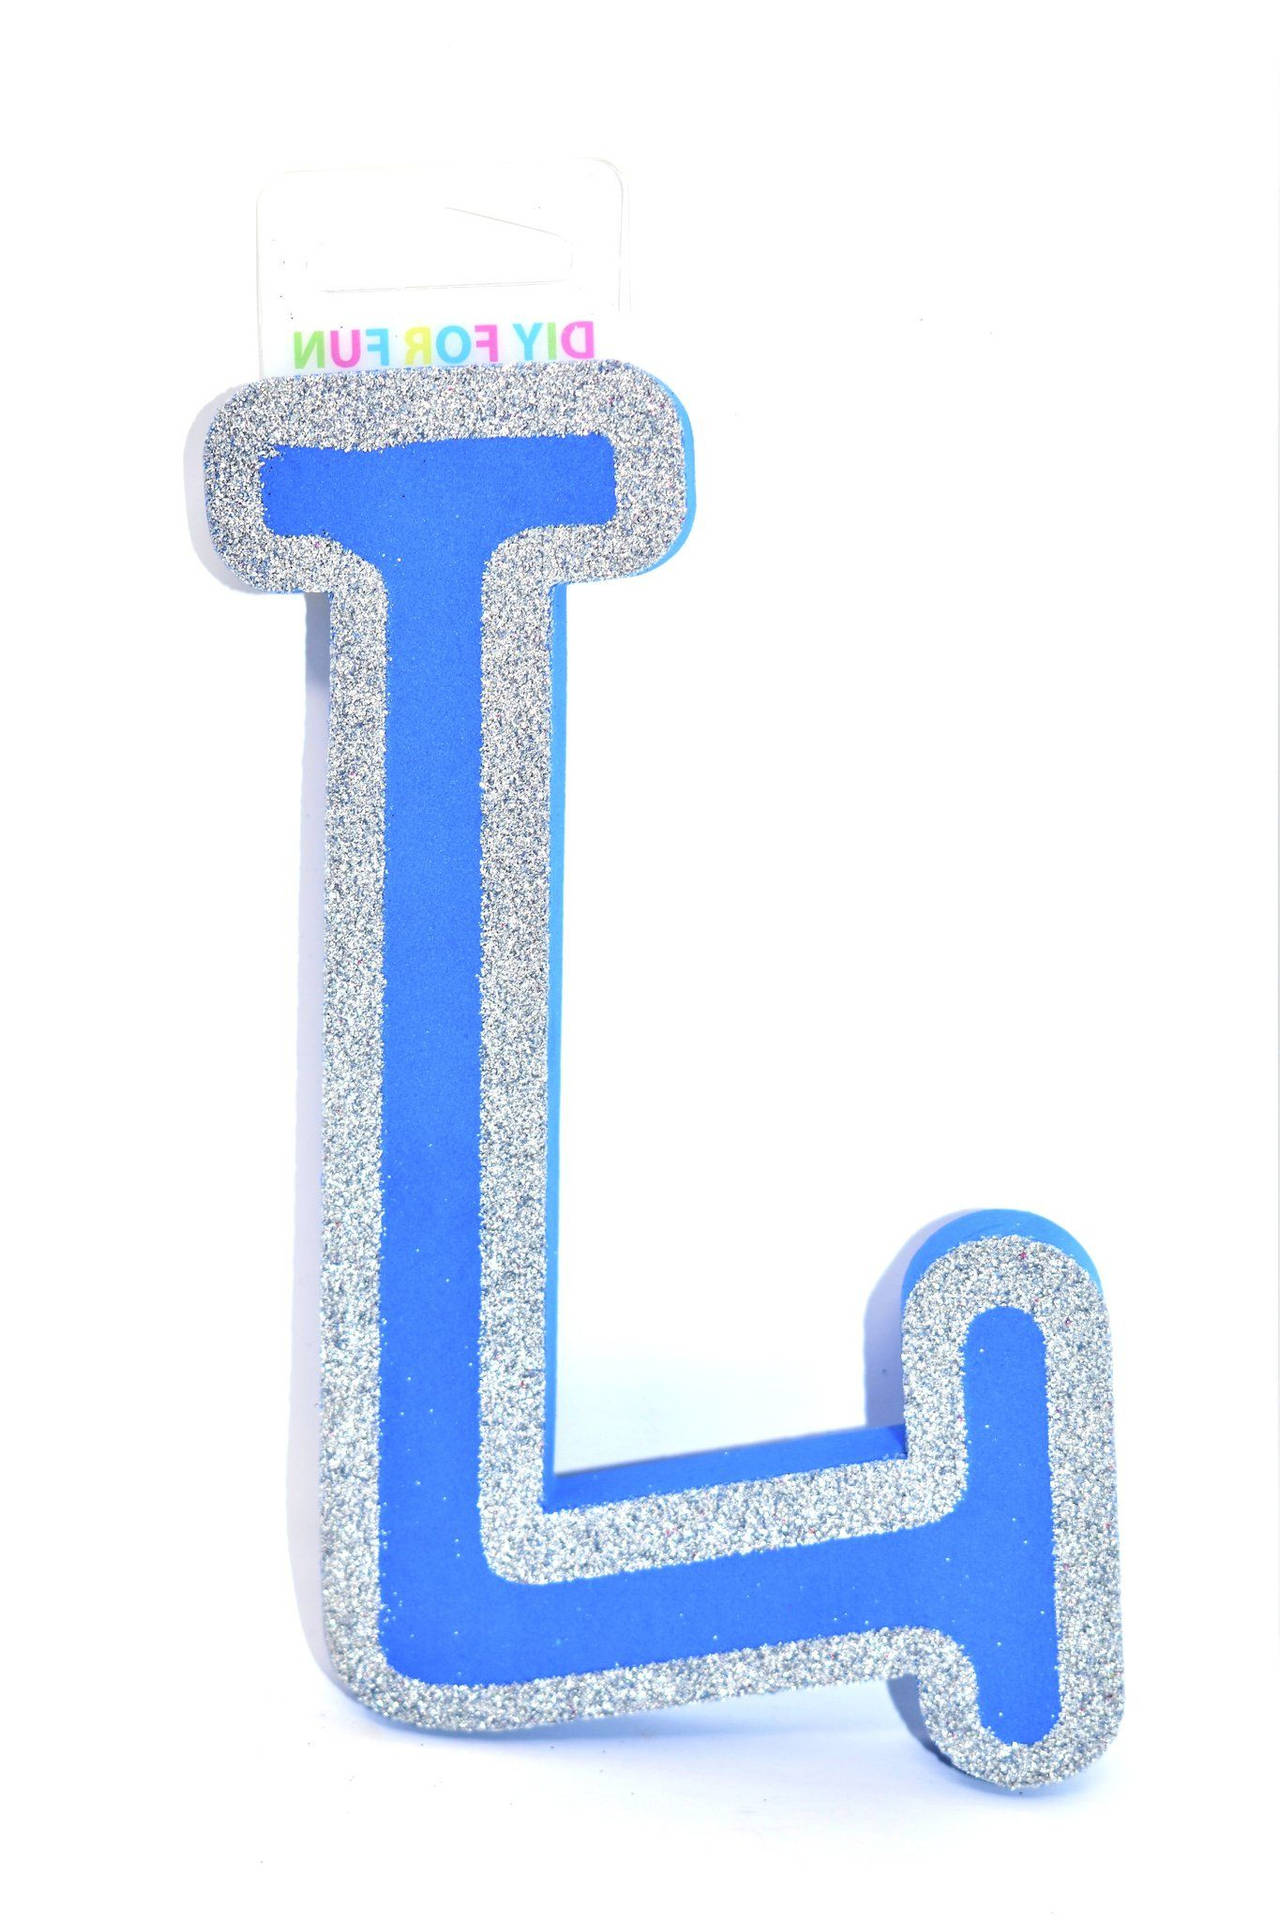 Blue Letter L With Glitters Wallpaper